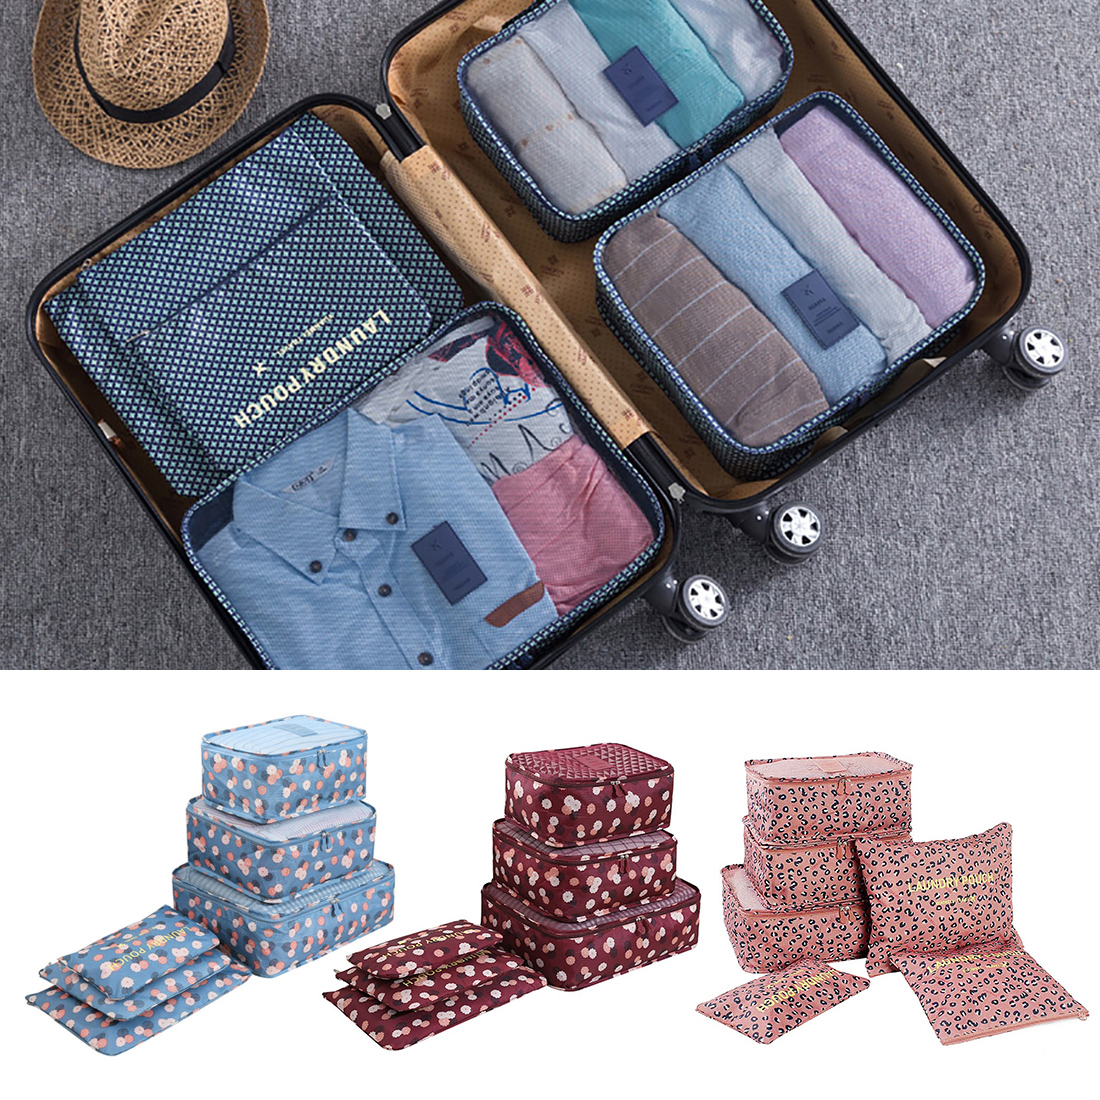 6Pcs Clothes Storage Bags Set Cube Daisy Printed Travel Home Luggage Organizer Pouch - Wine Red